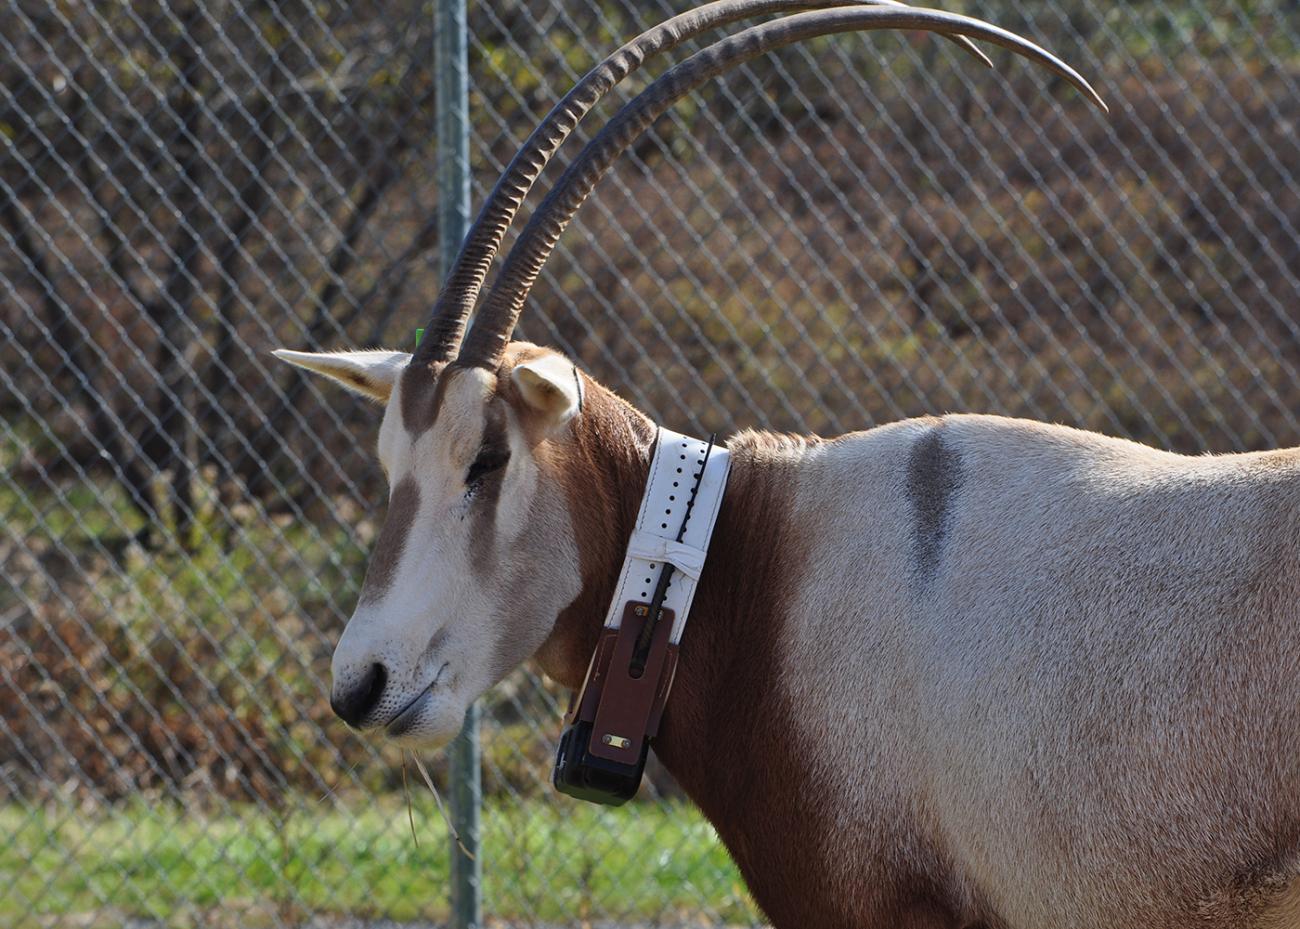 oryx with tracking collar on